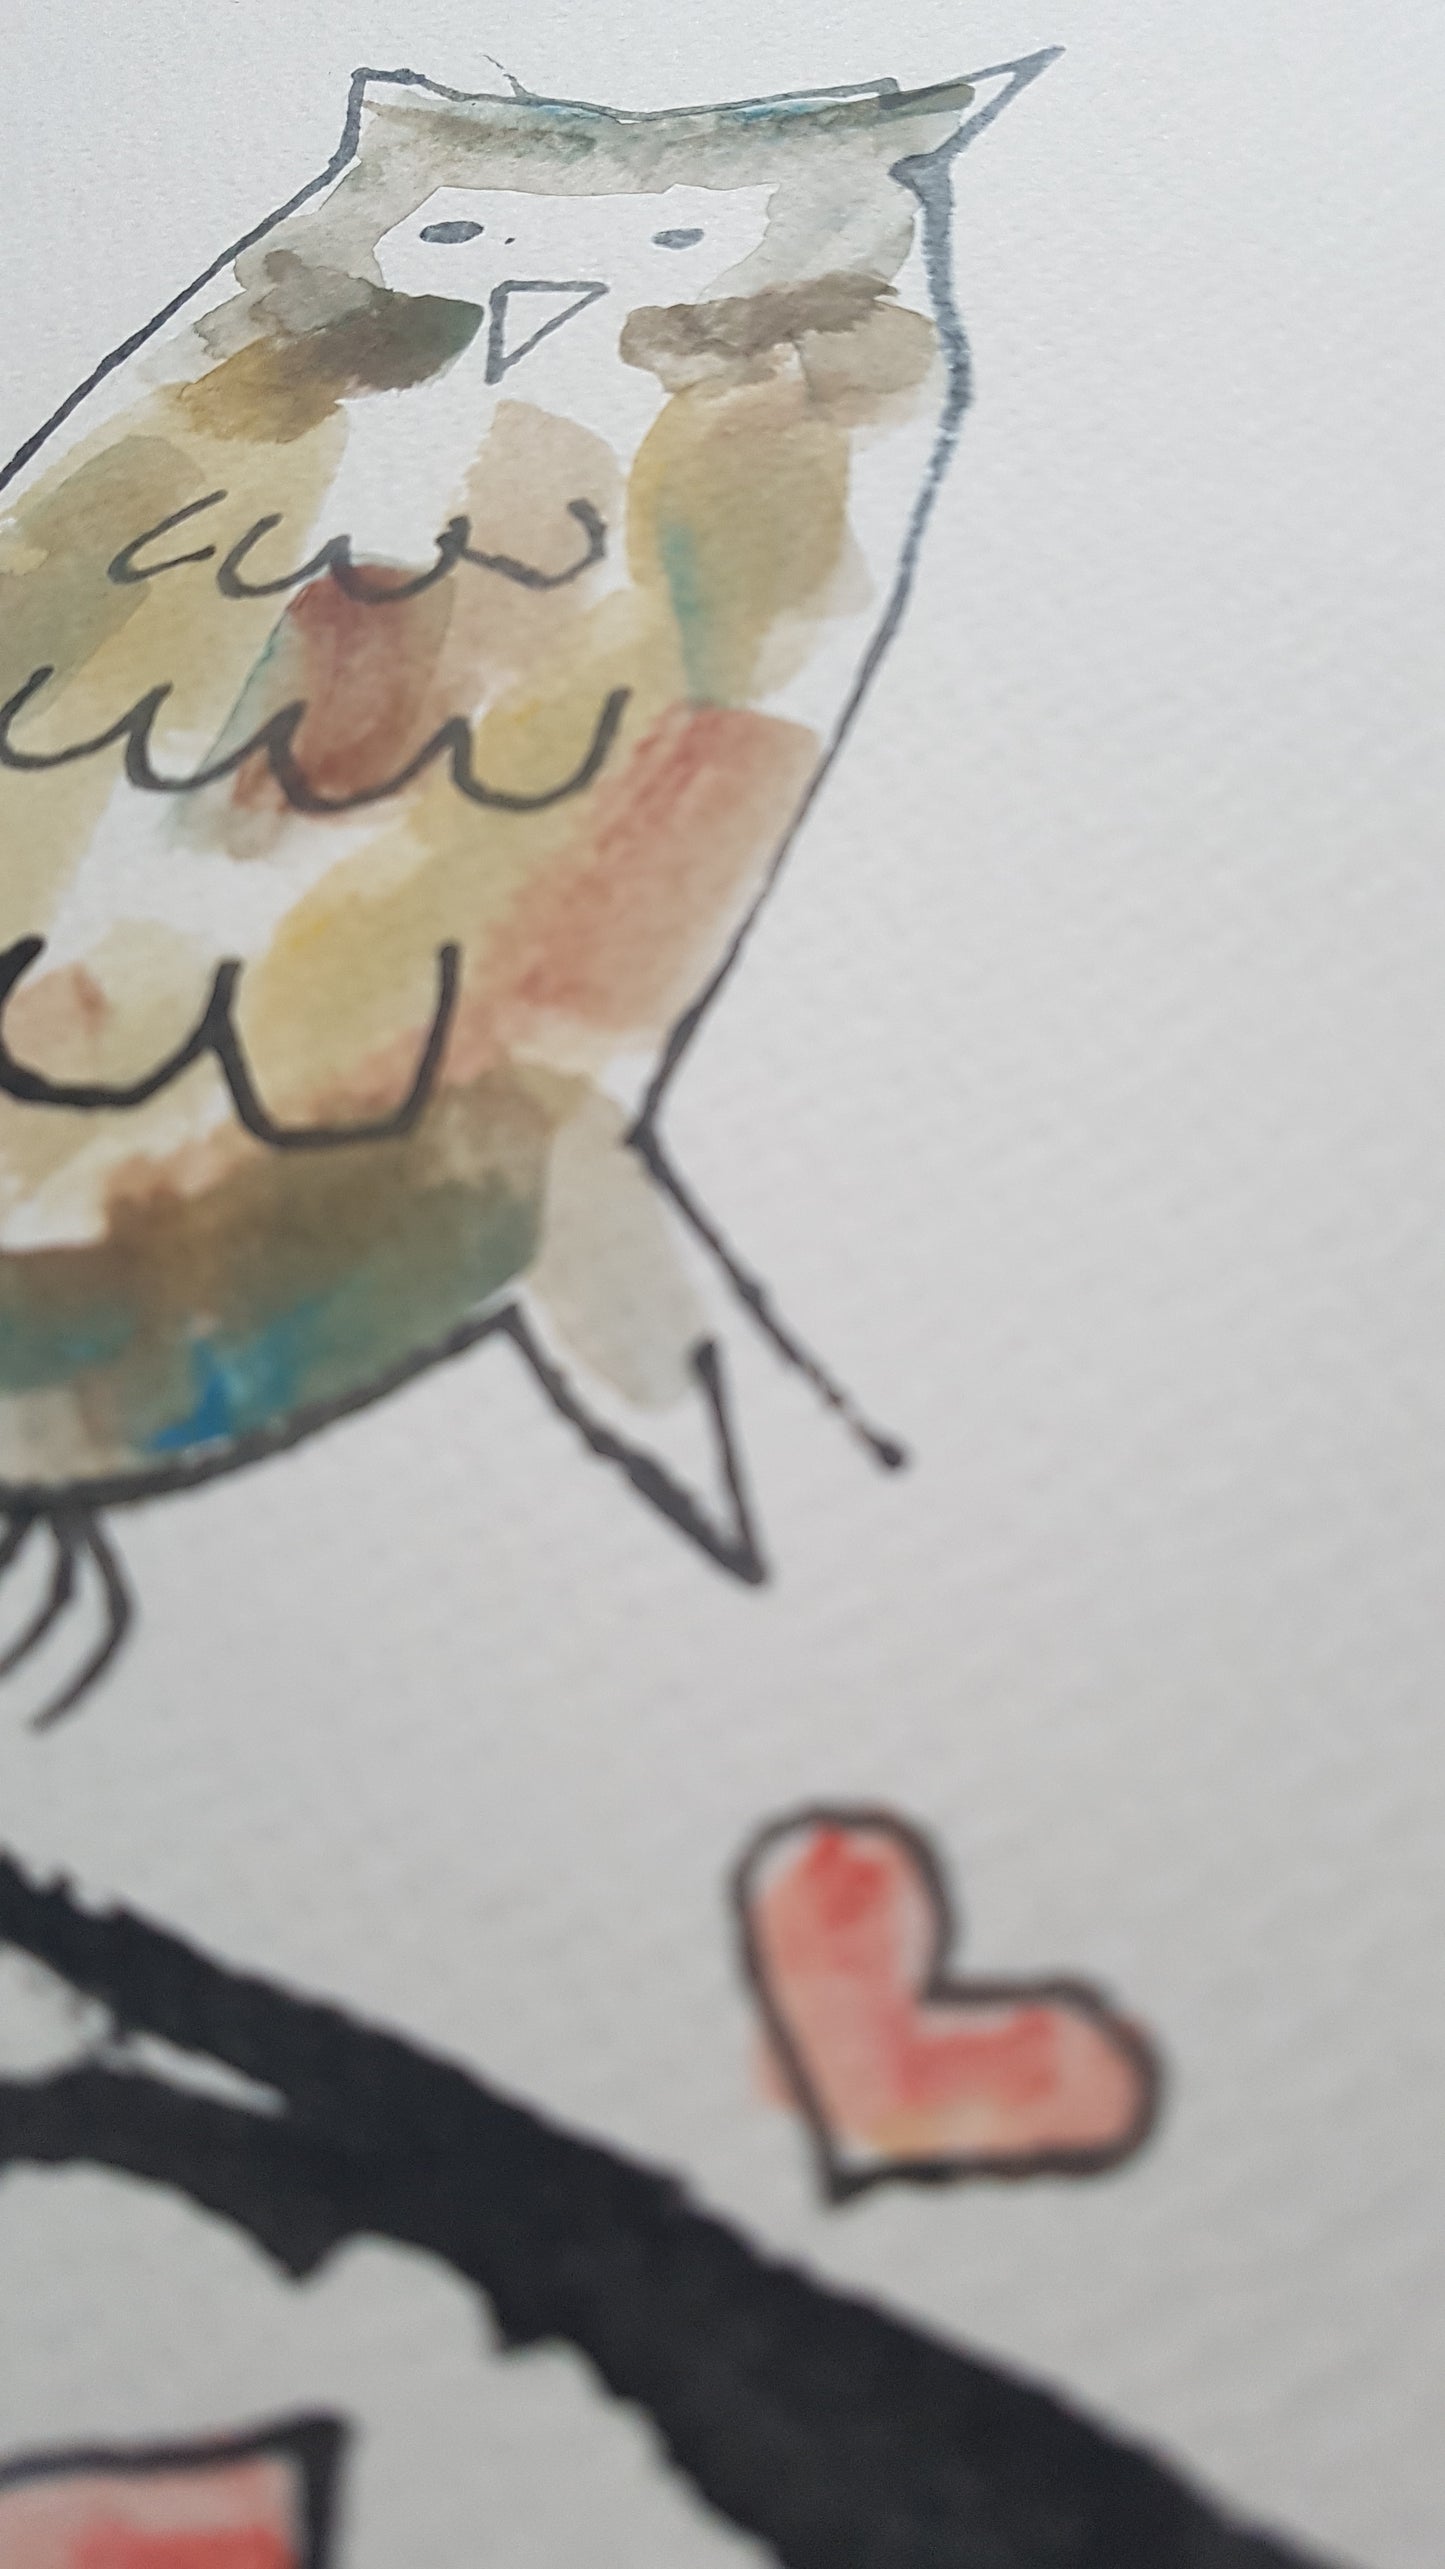 Original A4 Watercolour of owlways love you